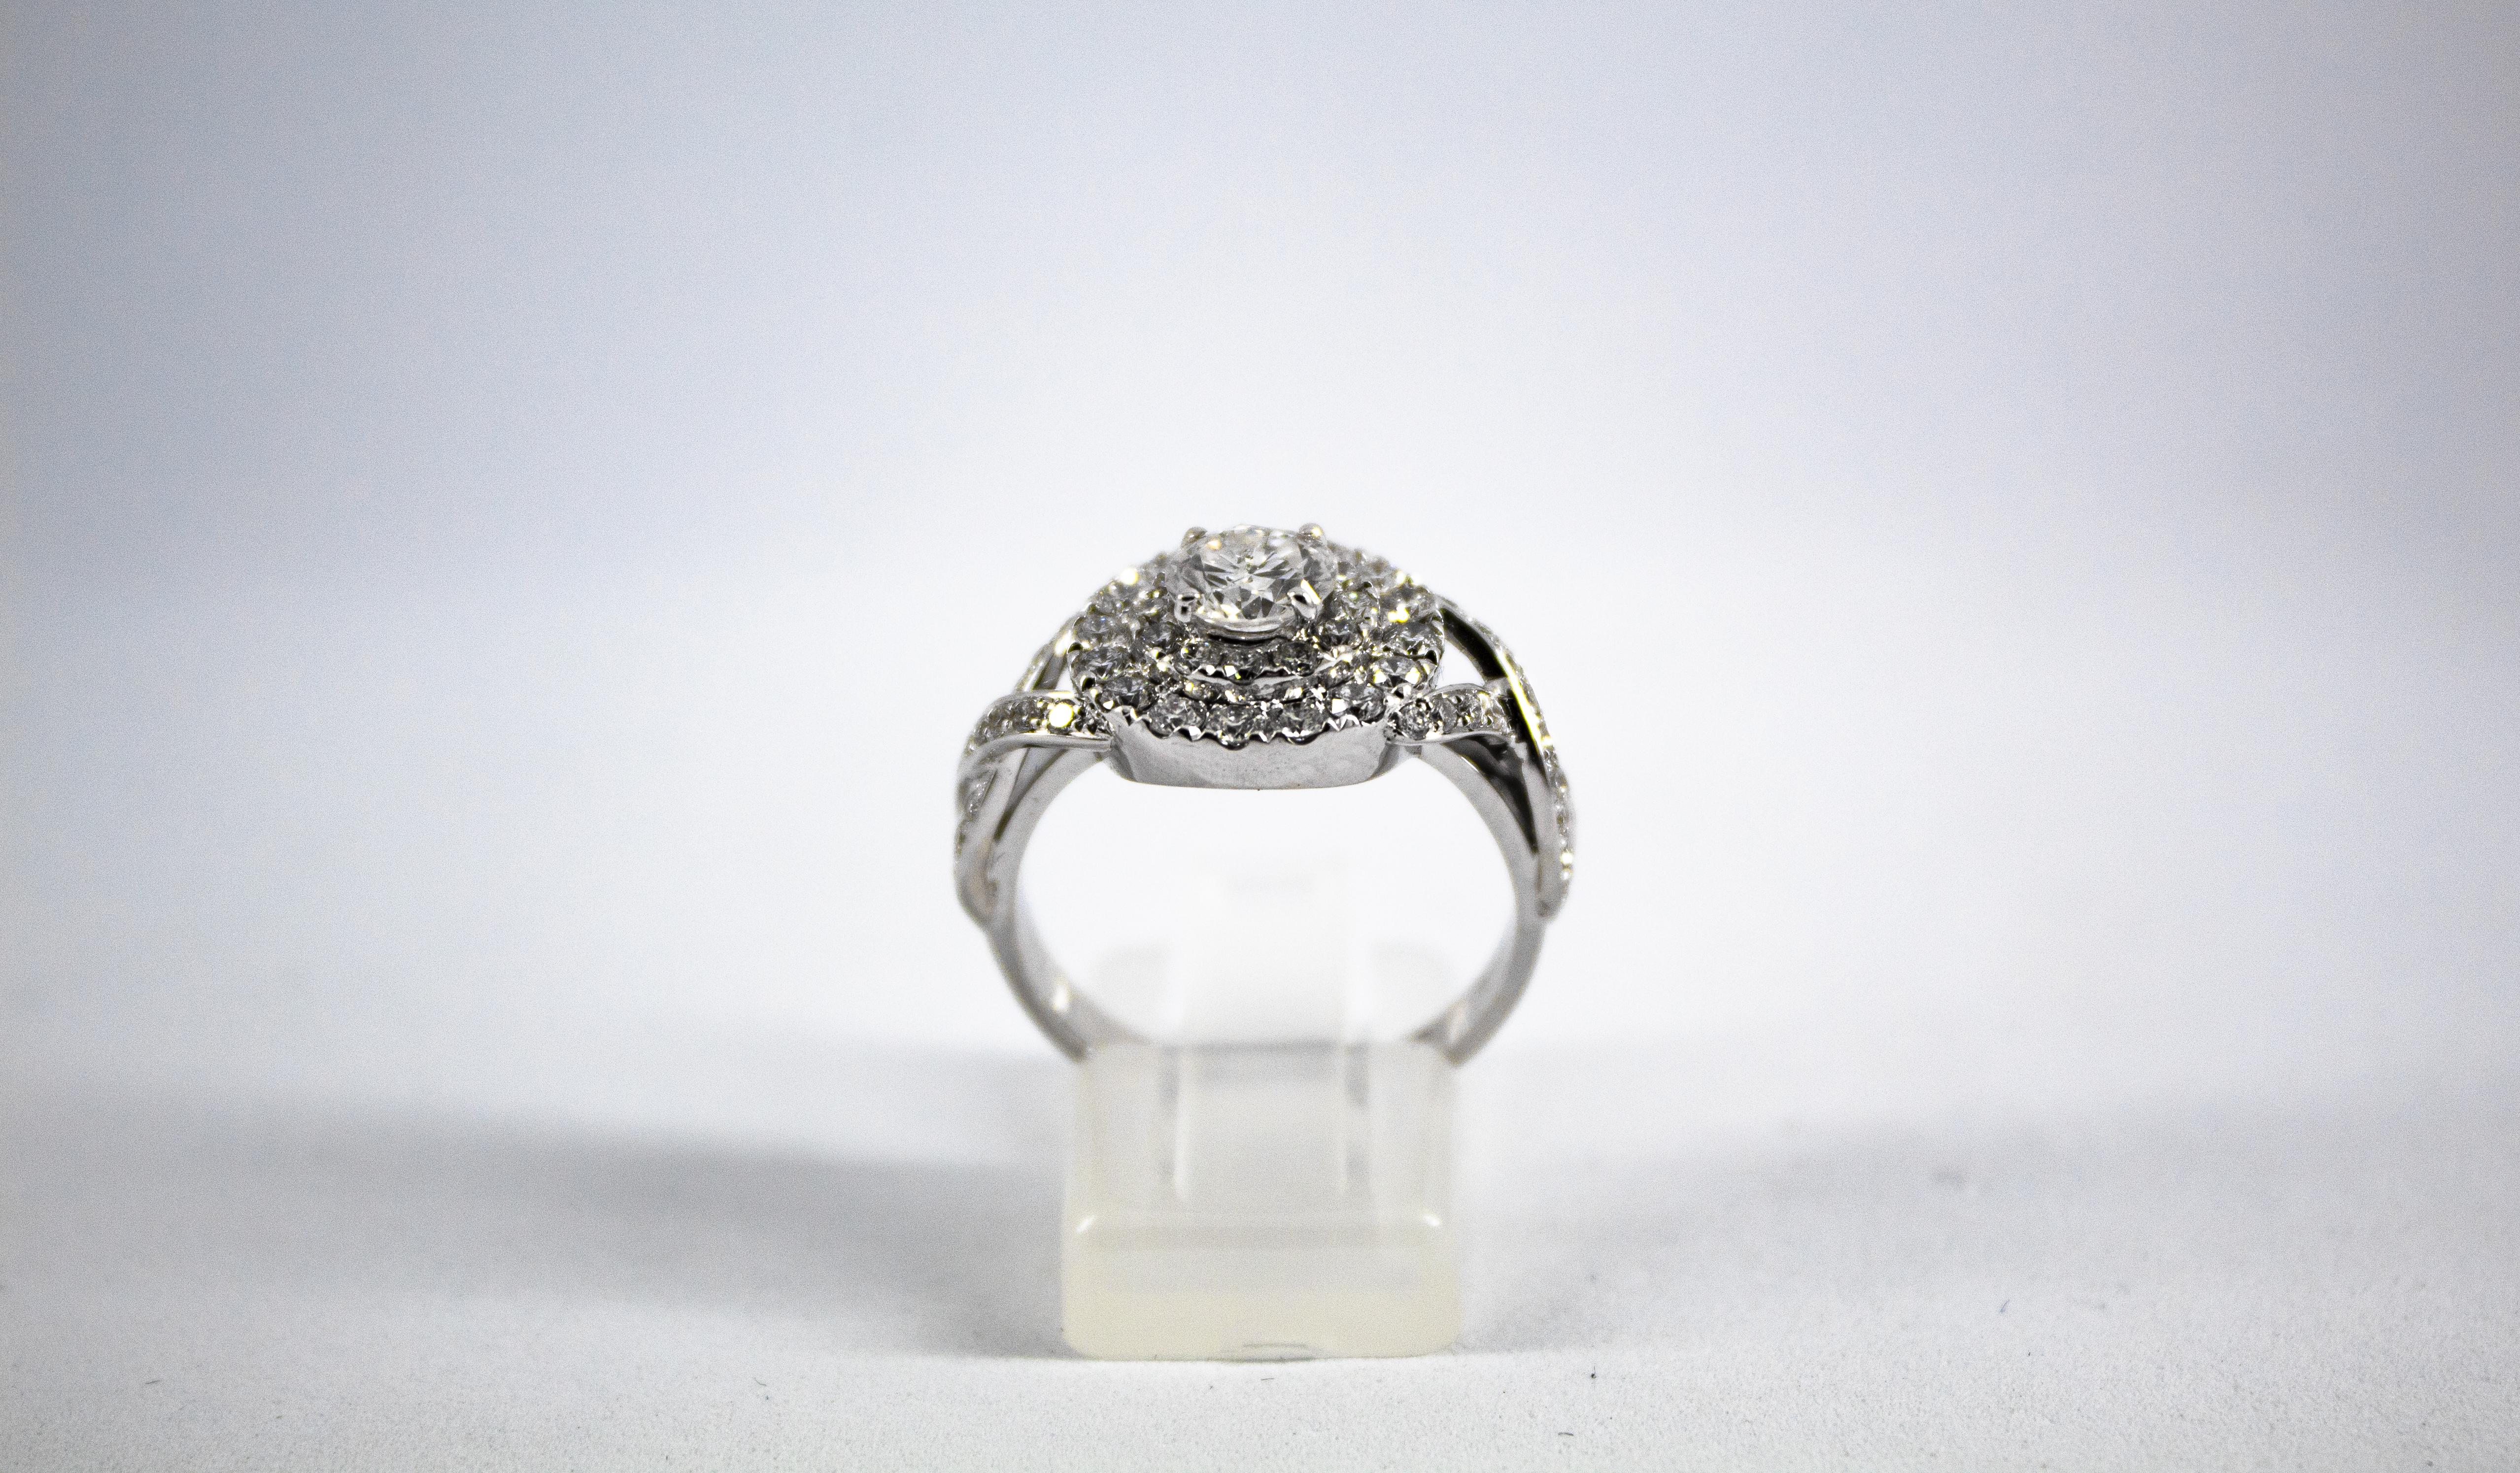 This Ring is made of 18K White Gold.
This Ring has a Central 0.86 Carats White Diamond.
This Ring has 1.15 Carats of White Diamonds.
Size ITA: 18 USA: 8 1/4
We're a workshop so every piece is handmade, customizable and resizable.